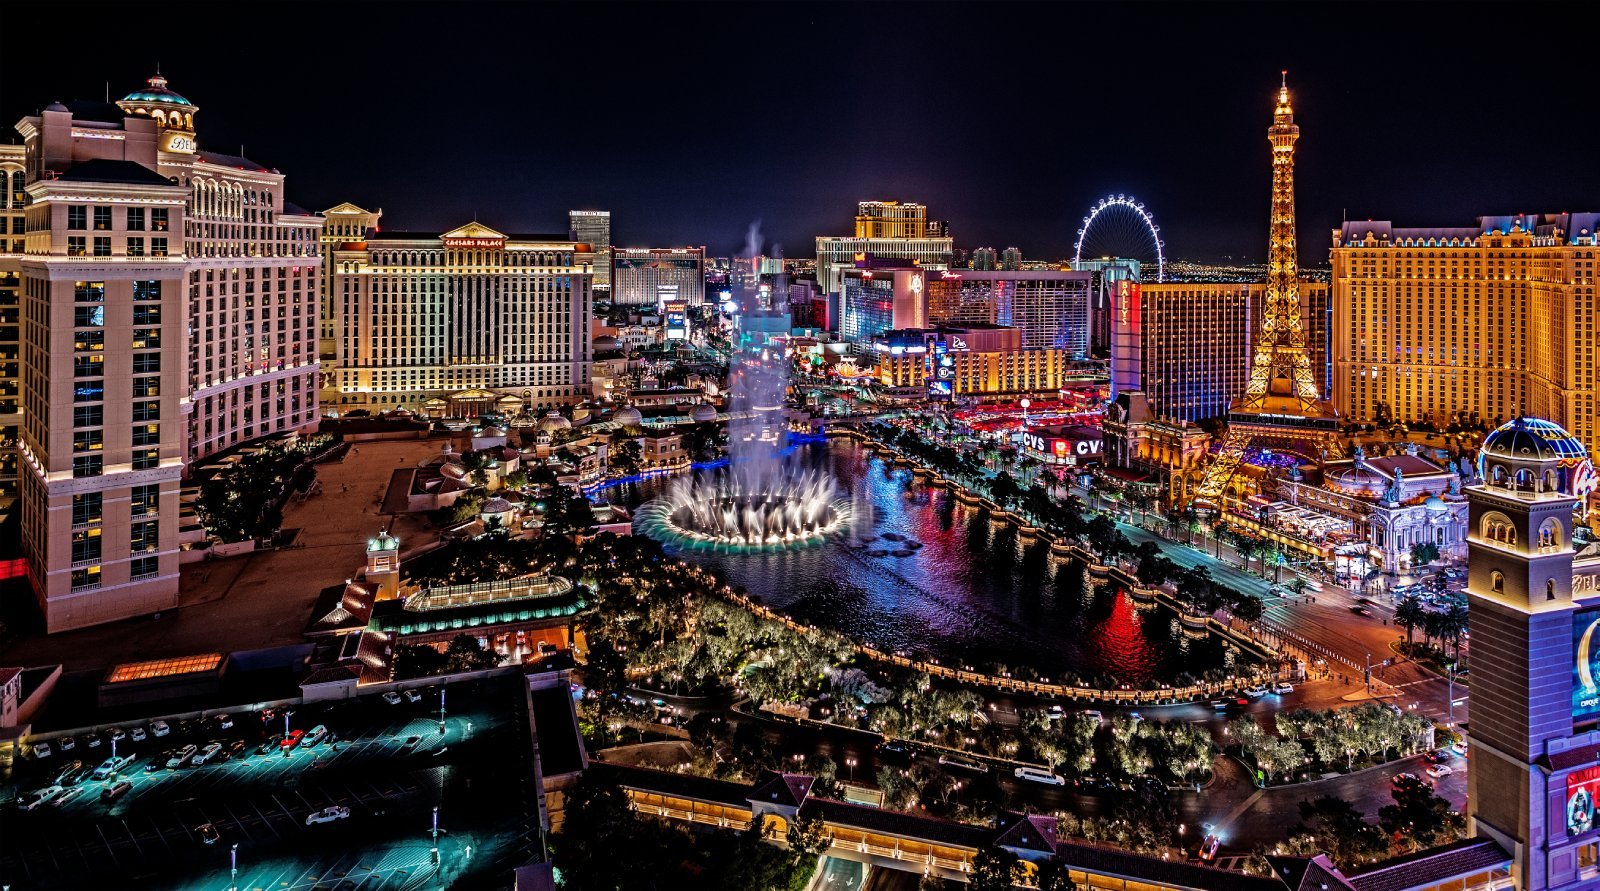 <p class="wp-caption-text">Image Credit: Shutterstock / randy andy</p>  <p><span>Las Vegas might tempt you to gamble, but the rest of Nevada offers a winning hand for comfortable living on around $55,000 a year.</span></p>